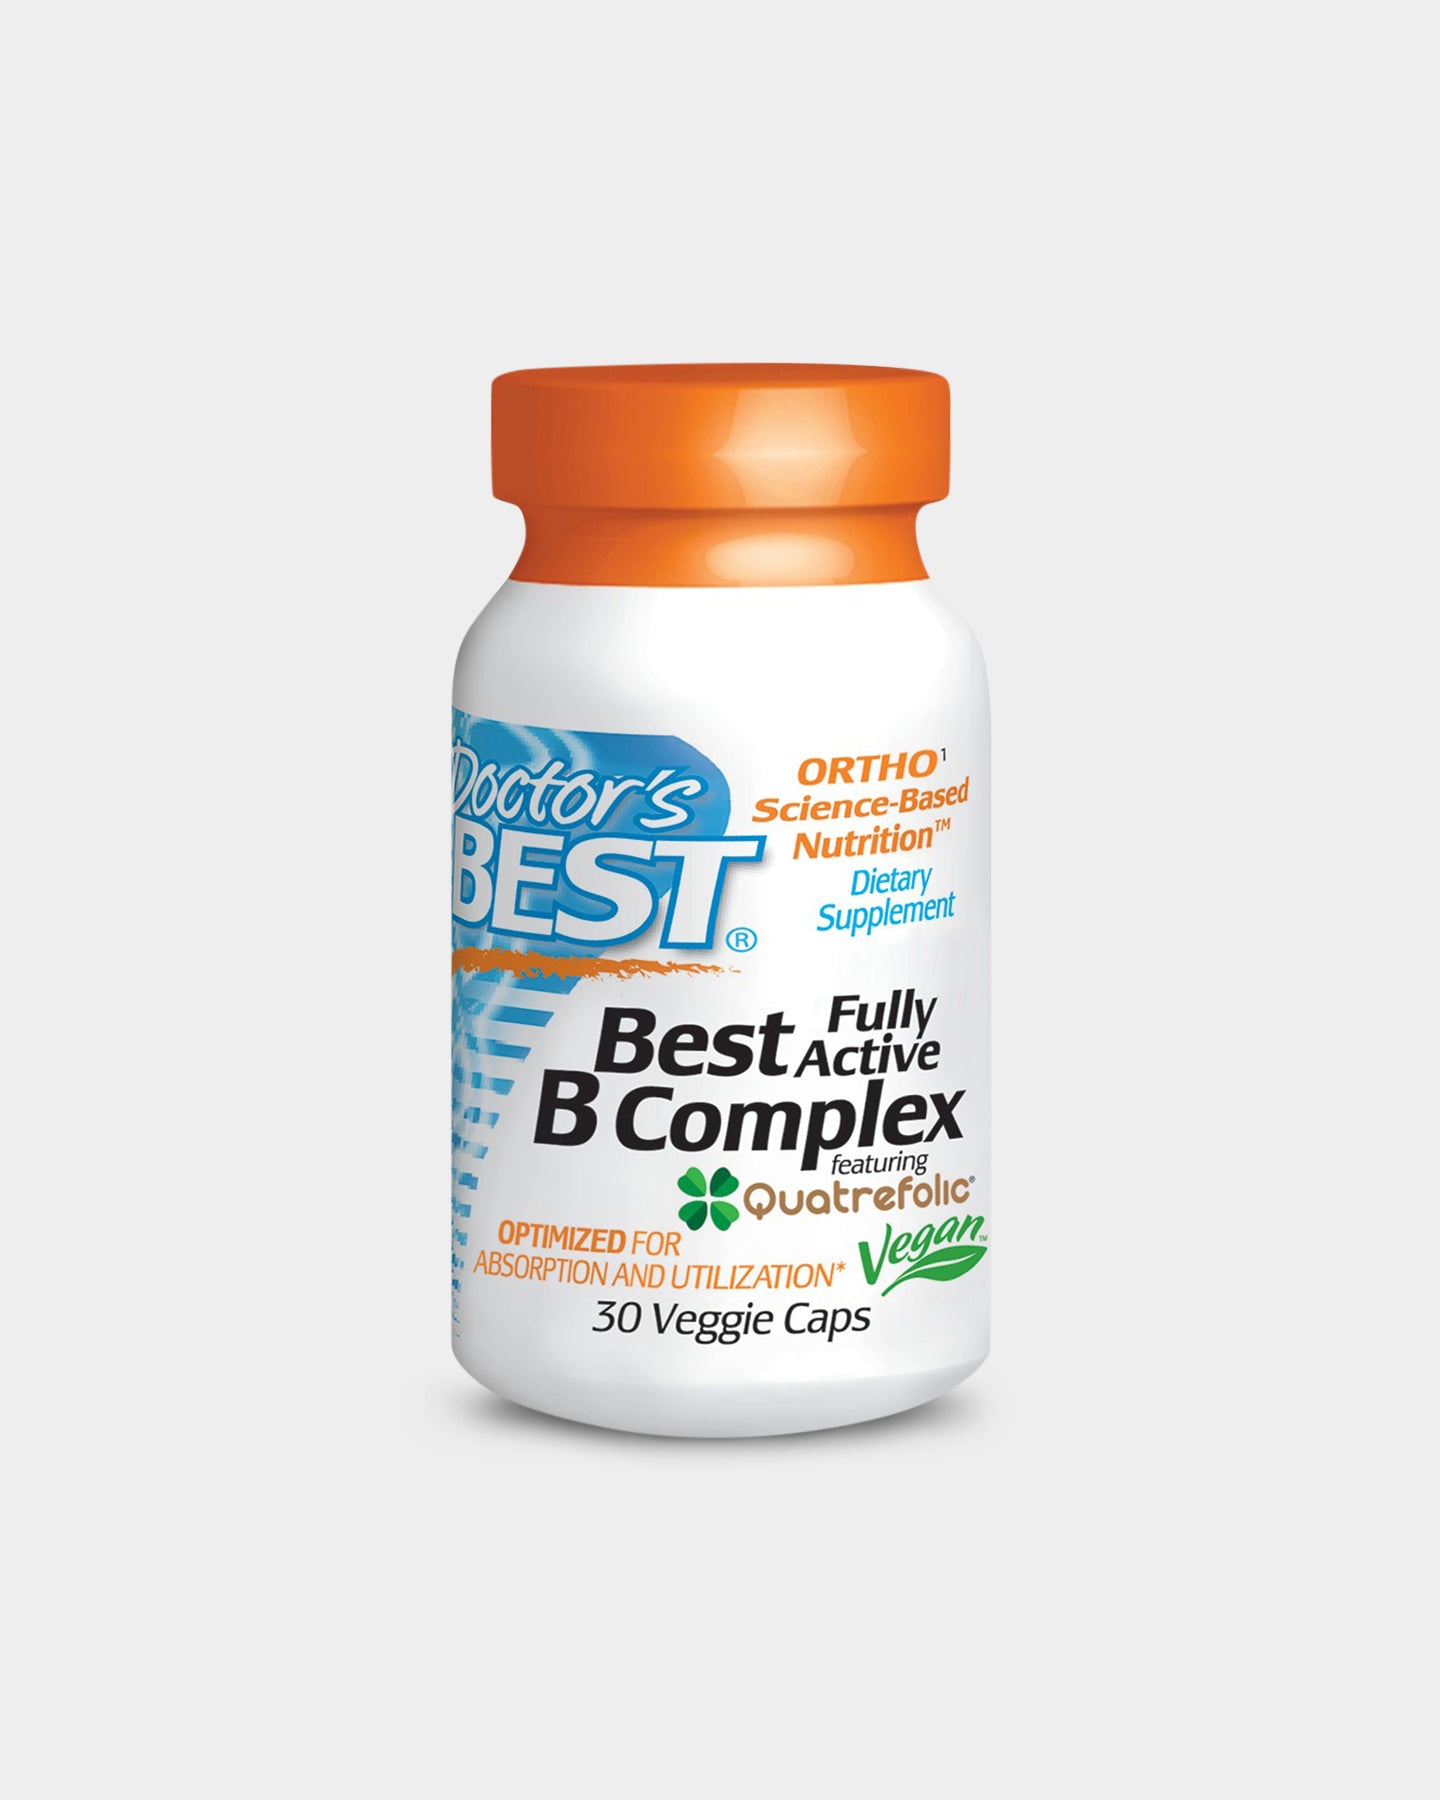 Image of Doctor's Best Fully Active B Complex